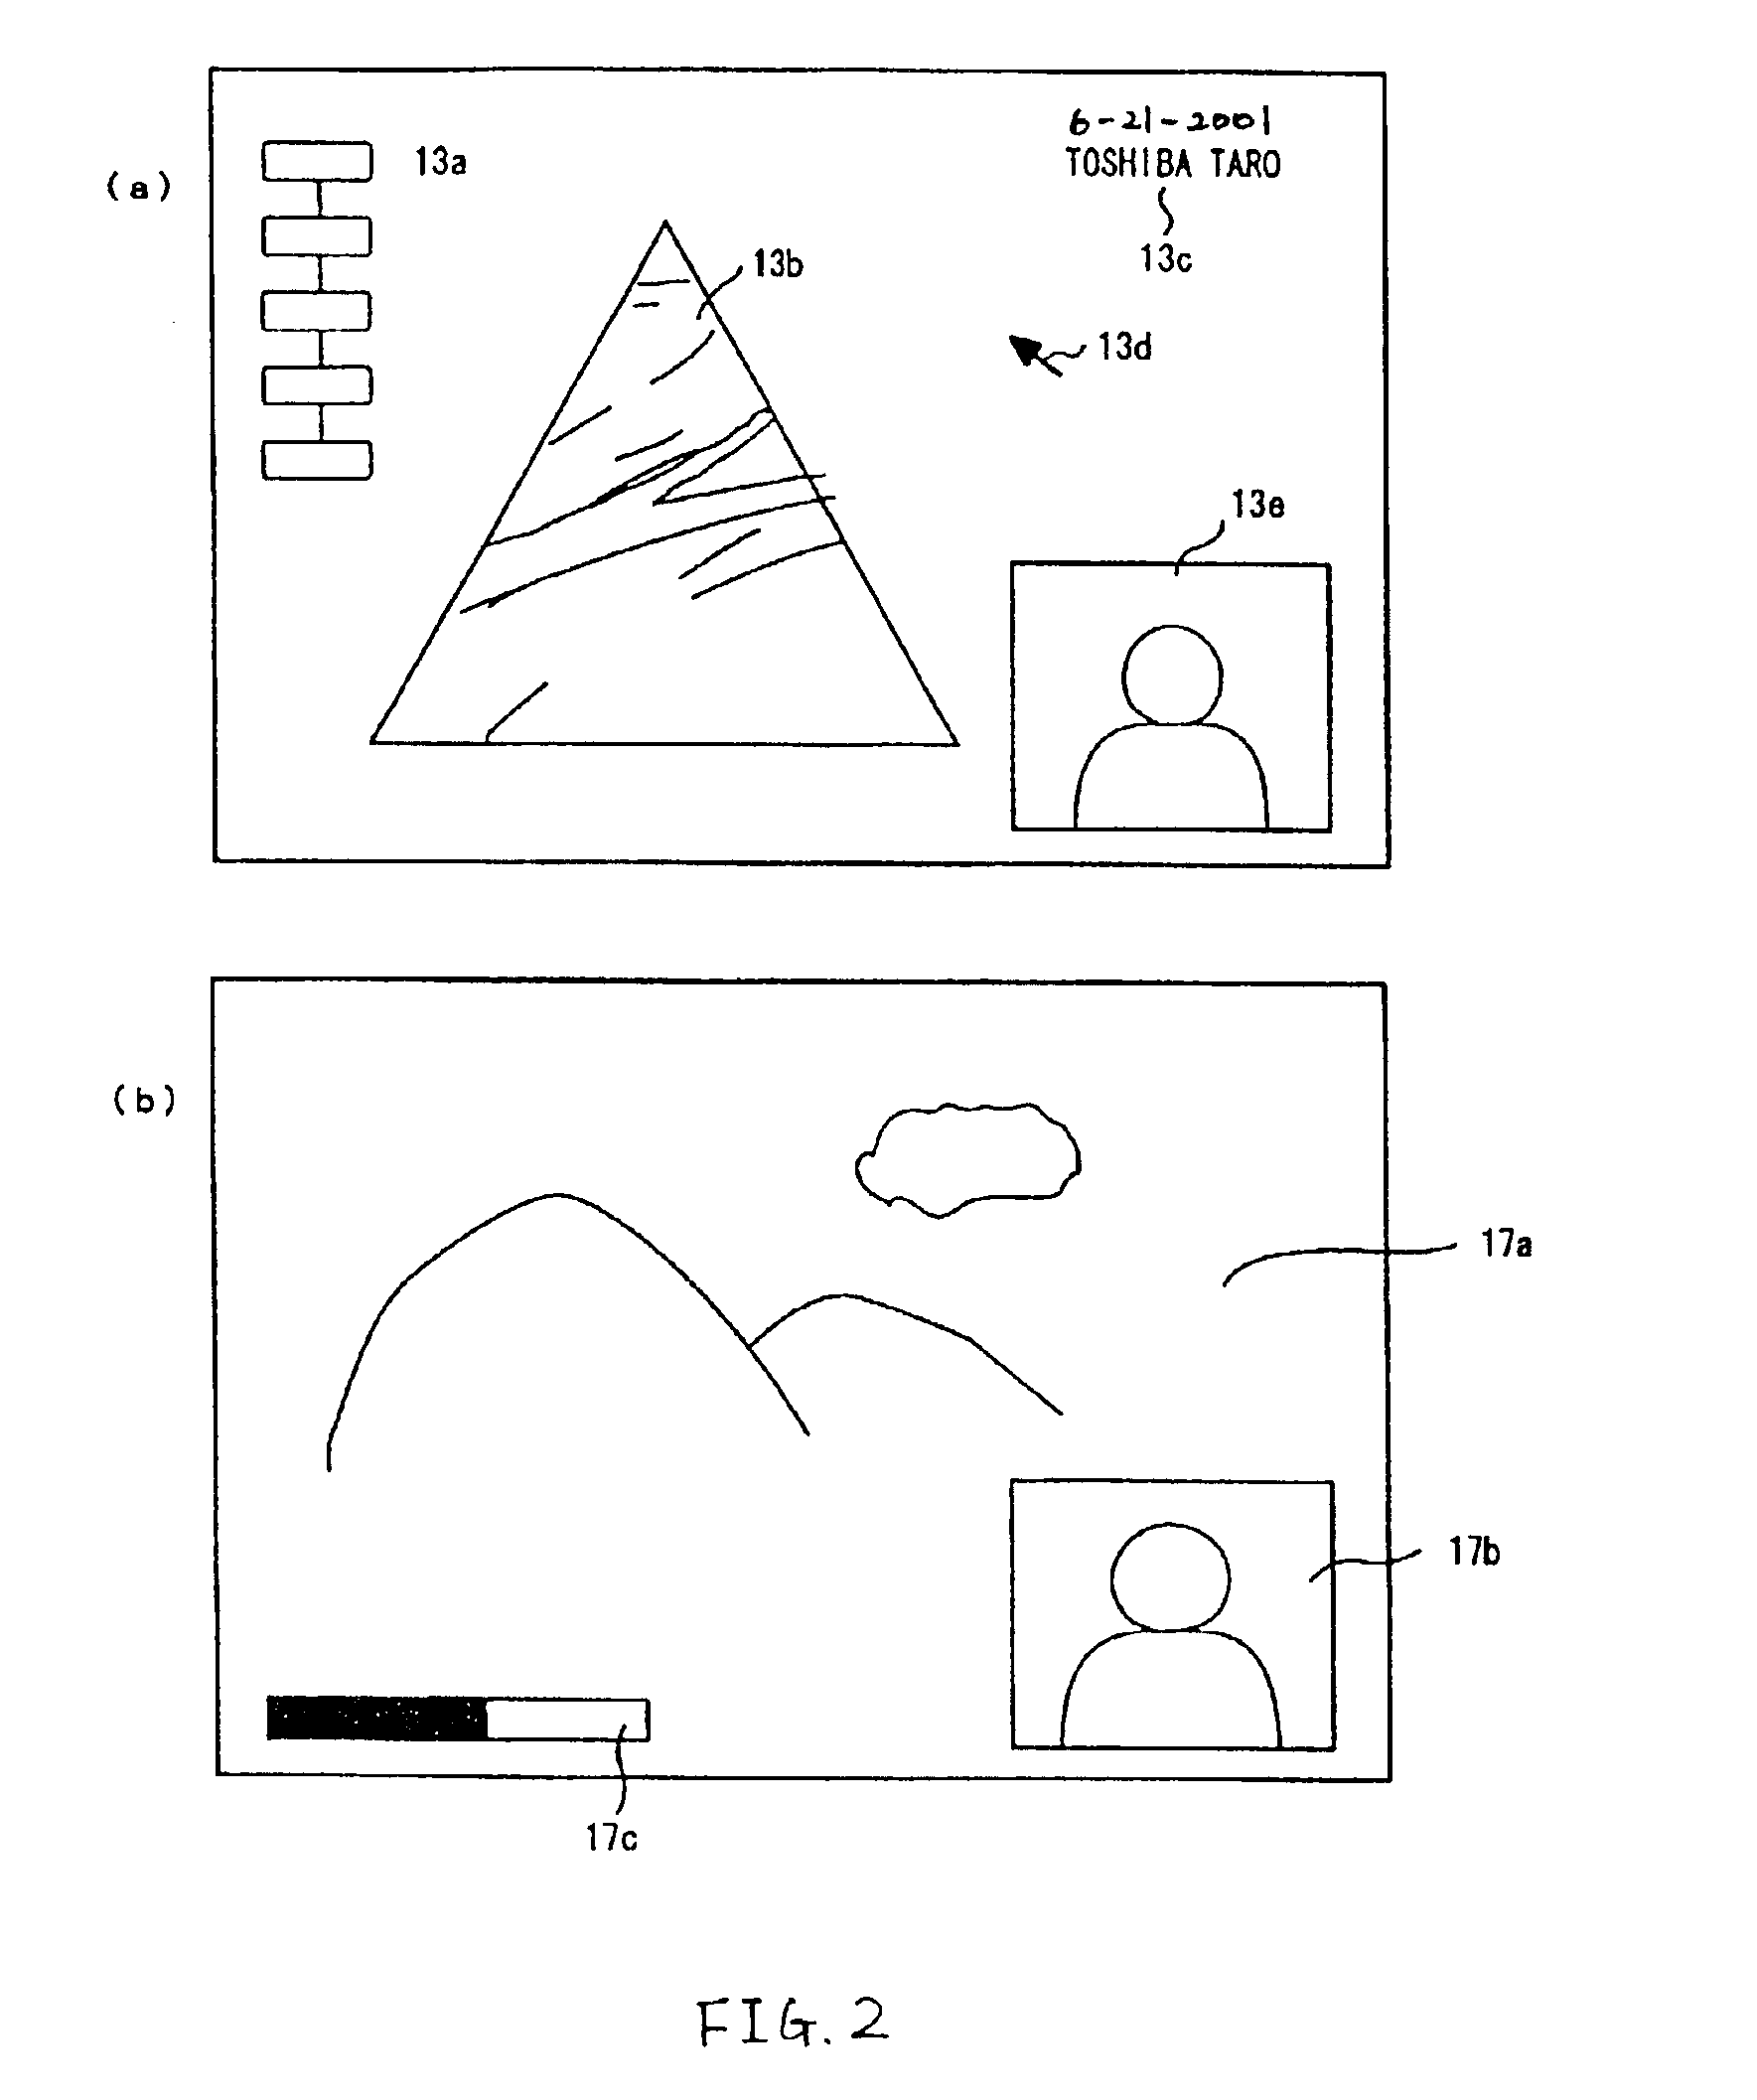 Medical diagnosis system having a medical diagnosis apparatus and a display to be observed by a patient